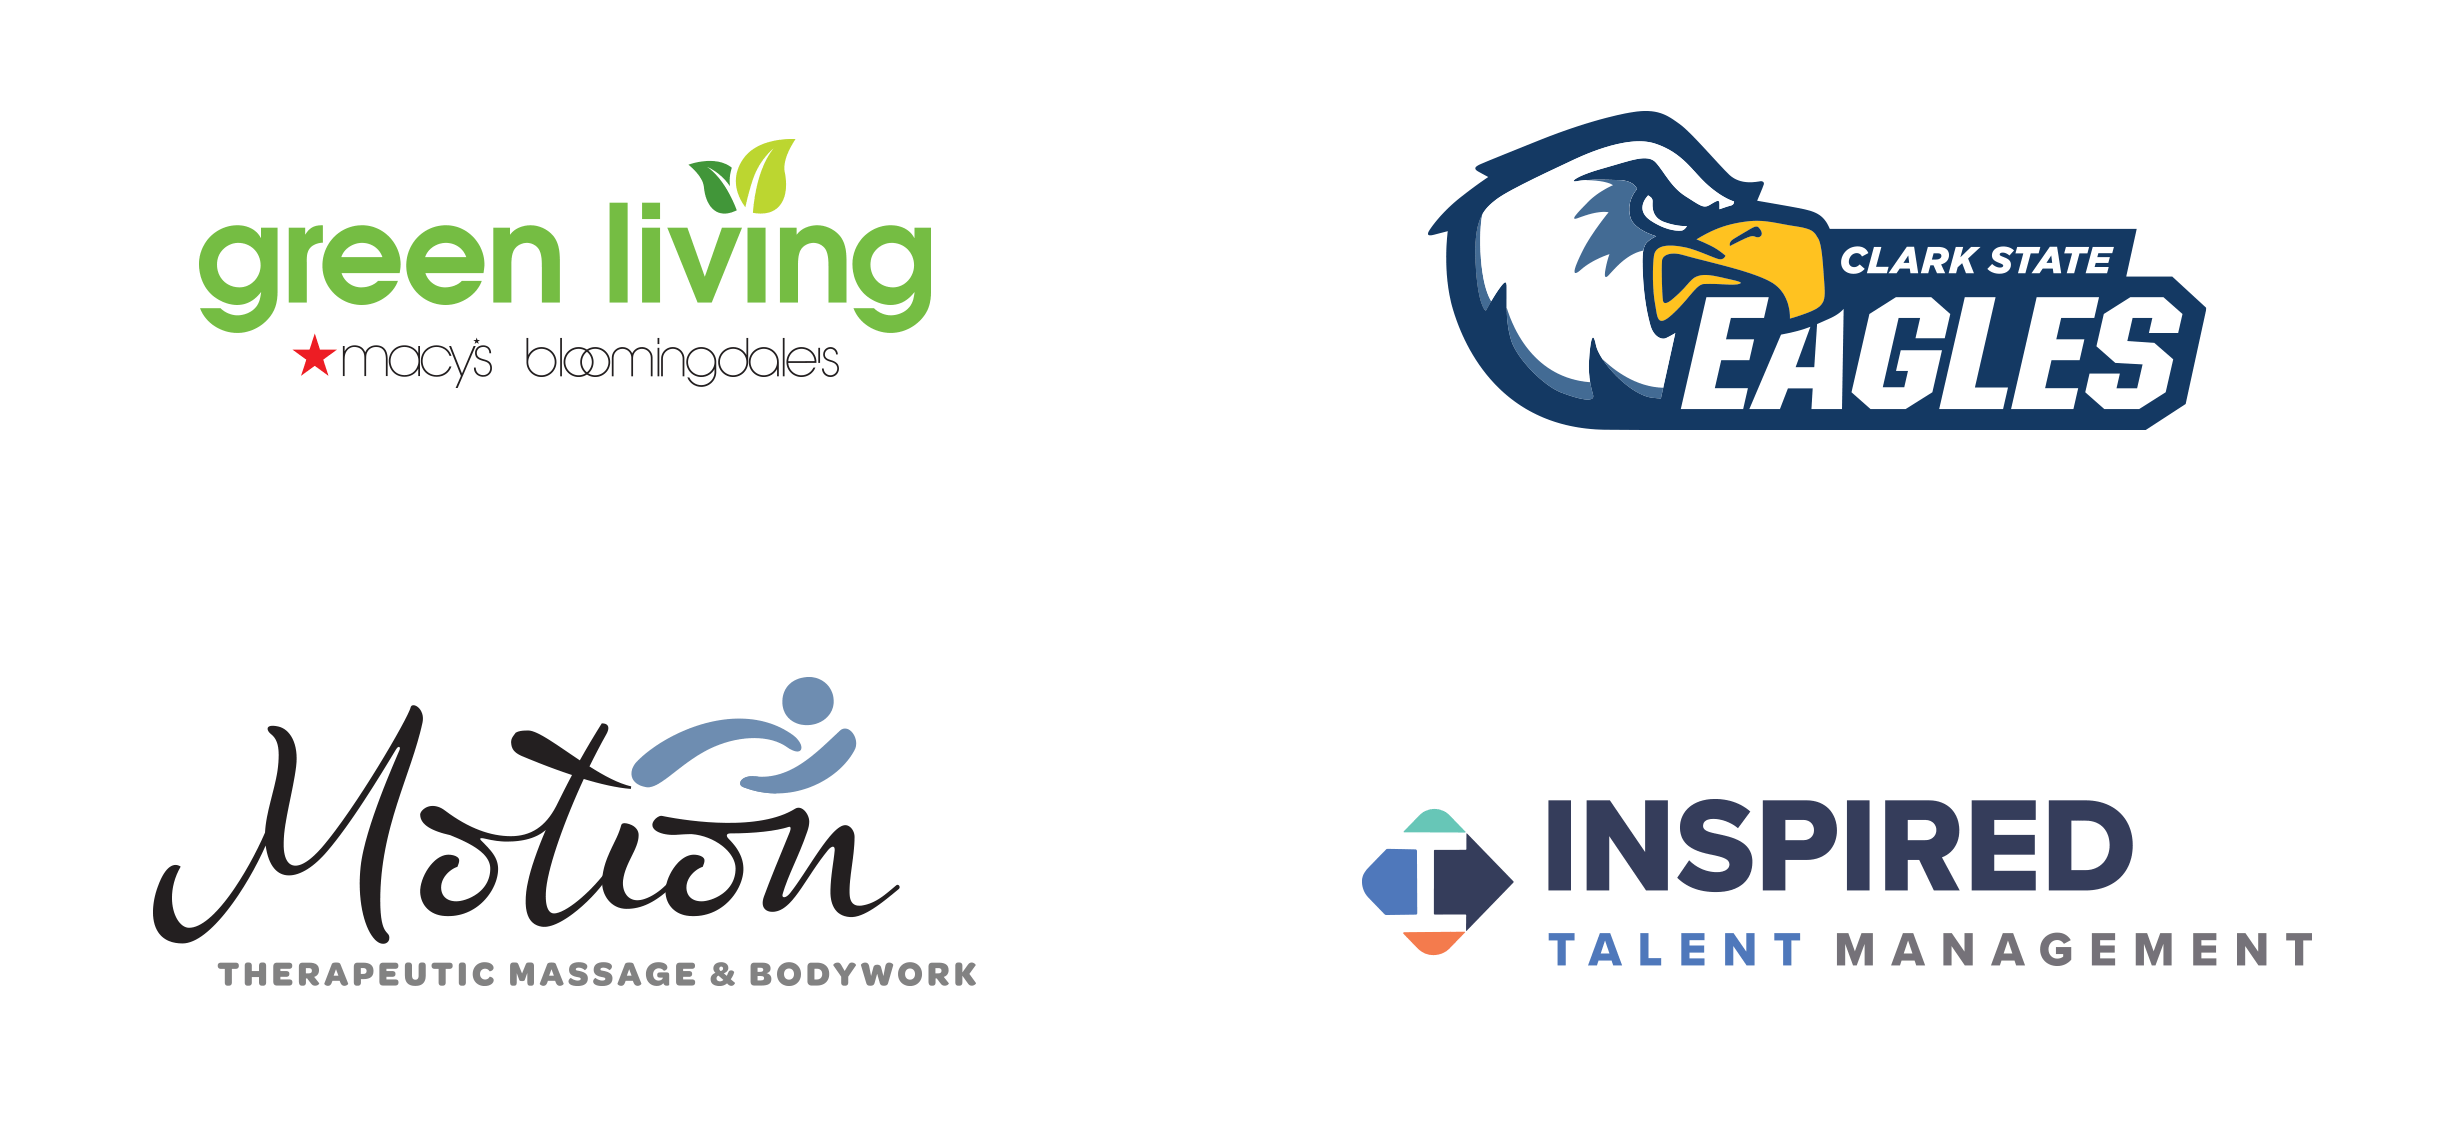 Final logo designs for Green Living, Clark State Eagles, Motion Therapeutic Massage and Bodywork and Inspired Talent Management